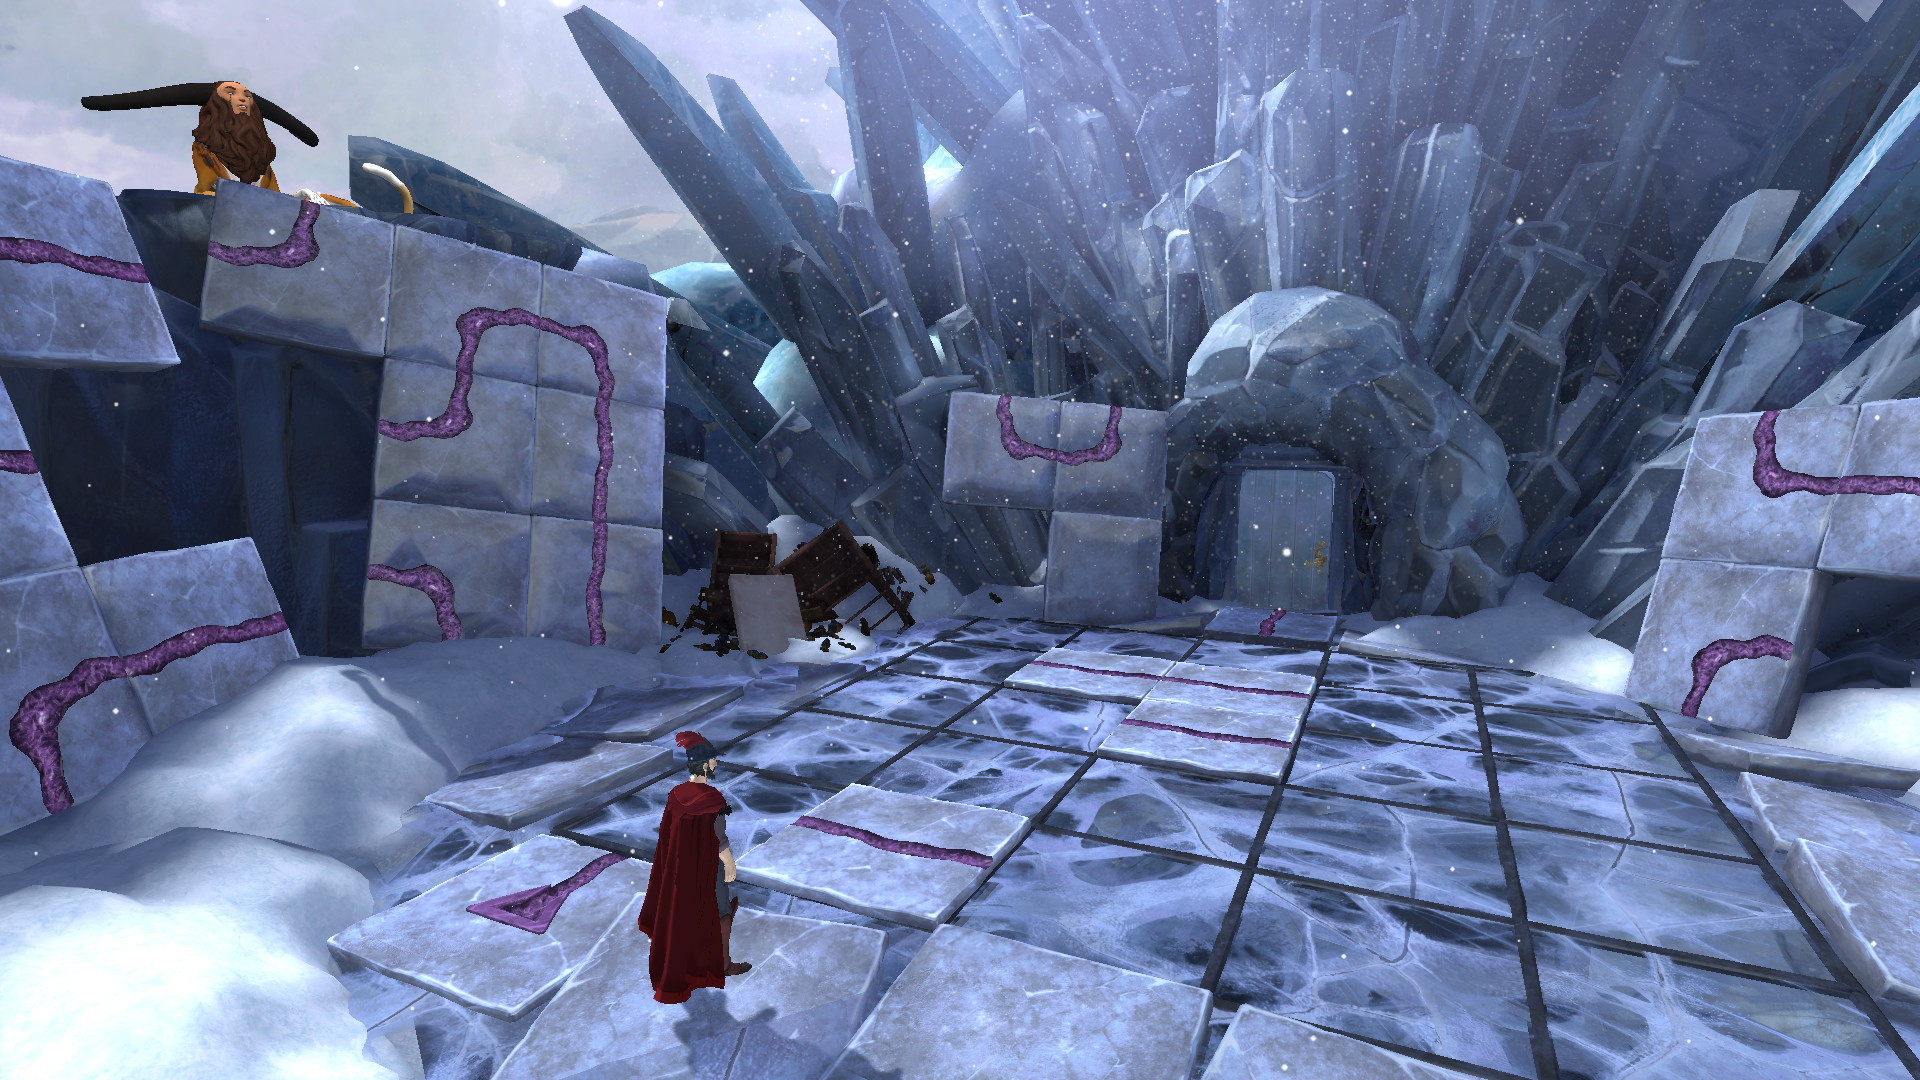 King's Quest - Chapter 4: Snow Place Like Home - screenshot 4